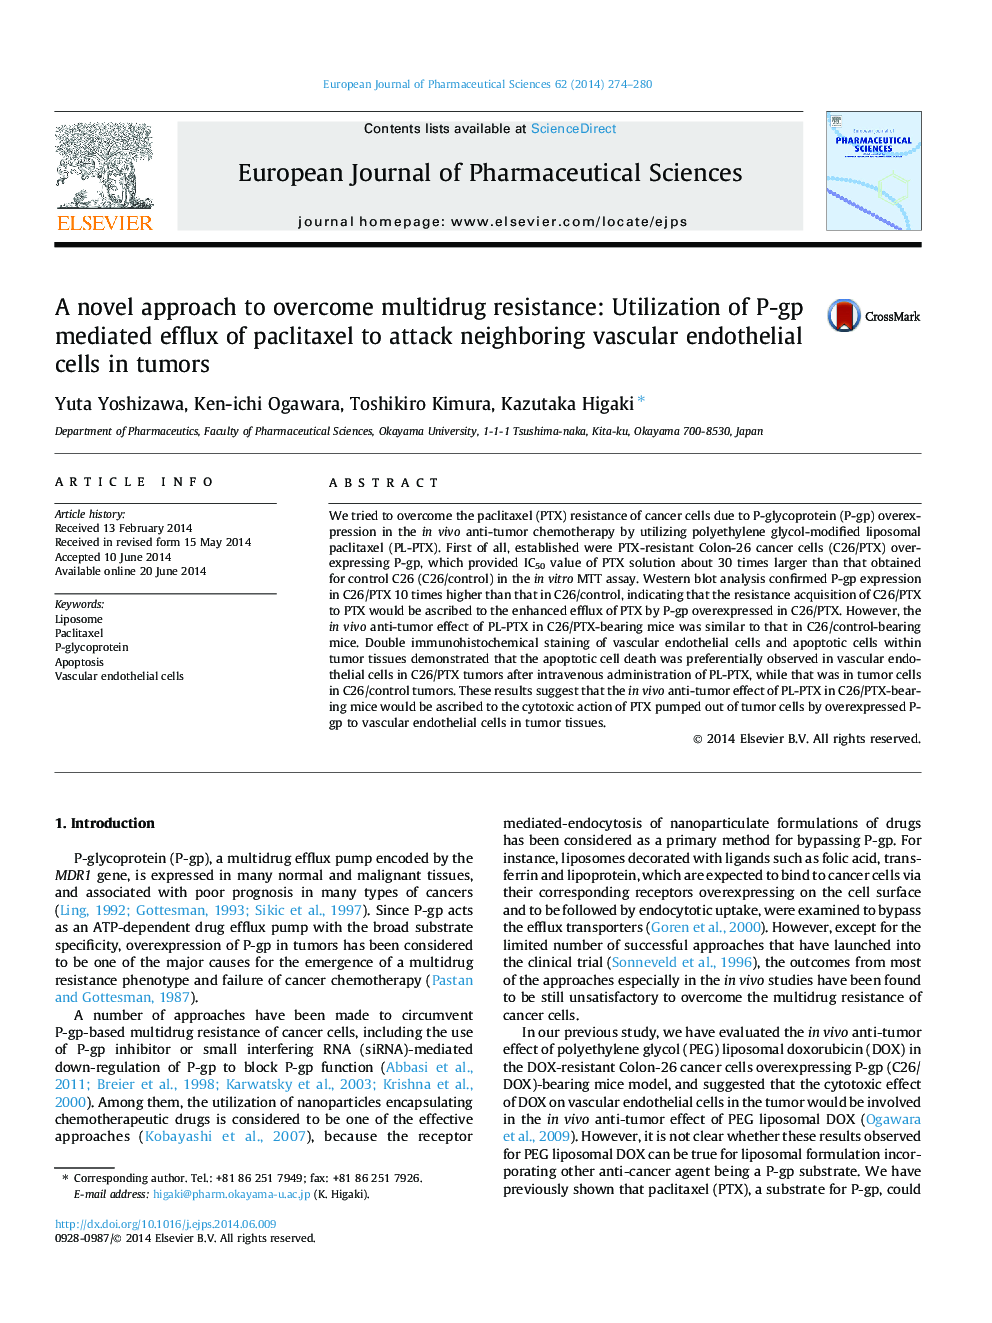 A novel approach to overcome multidrug resistance: Utilization of P-gp mediated efflux of paclitaxel to attack neighboring vascular endothelial cells in tumors